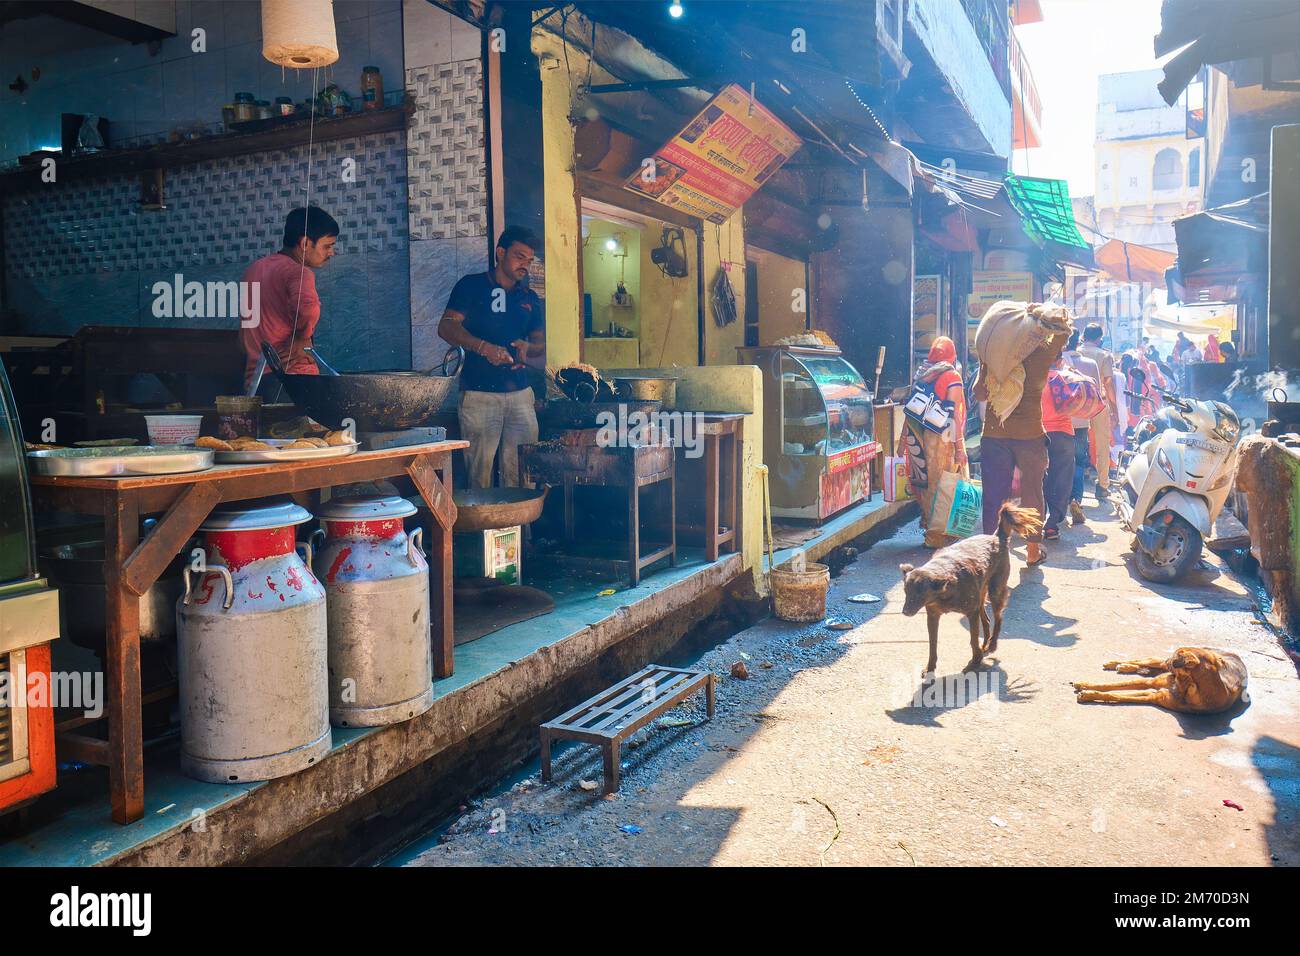 Pushkar, India - November 7, 2019: Indian street with people and food stall with Indian cook makes fresh street food Murukku Stock Photo